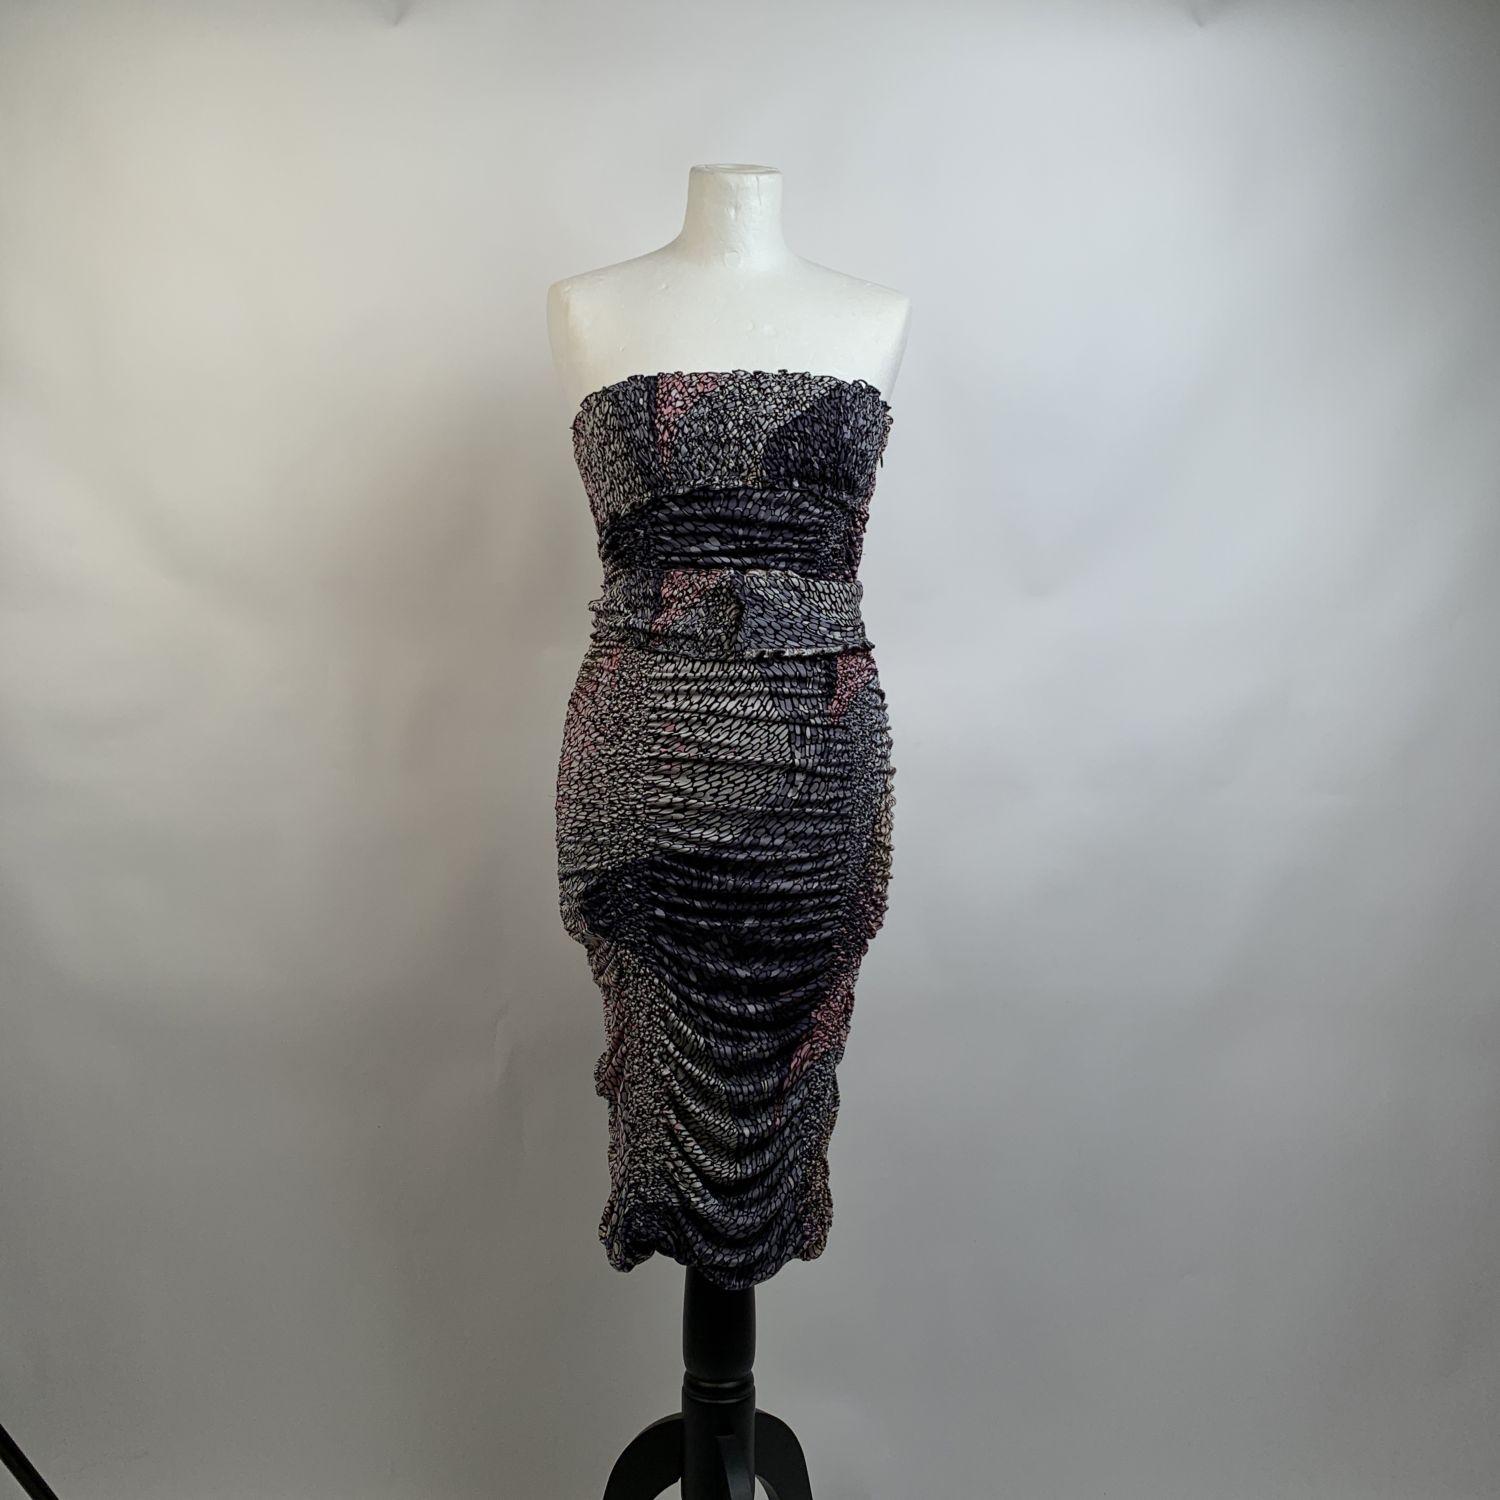 MISSONI bustier dress with ruched detail and all-over abstract print in a gray colorway. It features a matching waist belt, strapless design, side zip closure. Composition: 100% Silk. Stretch fabric. Lined. Size: 40 IT (it should correspond to a